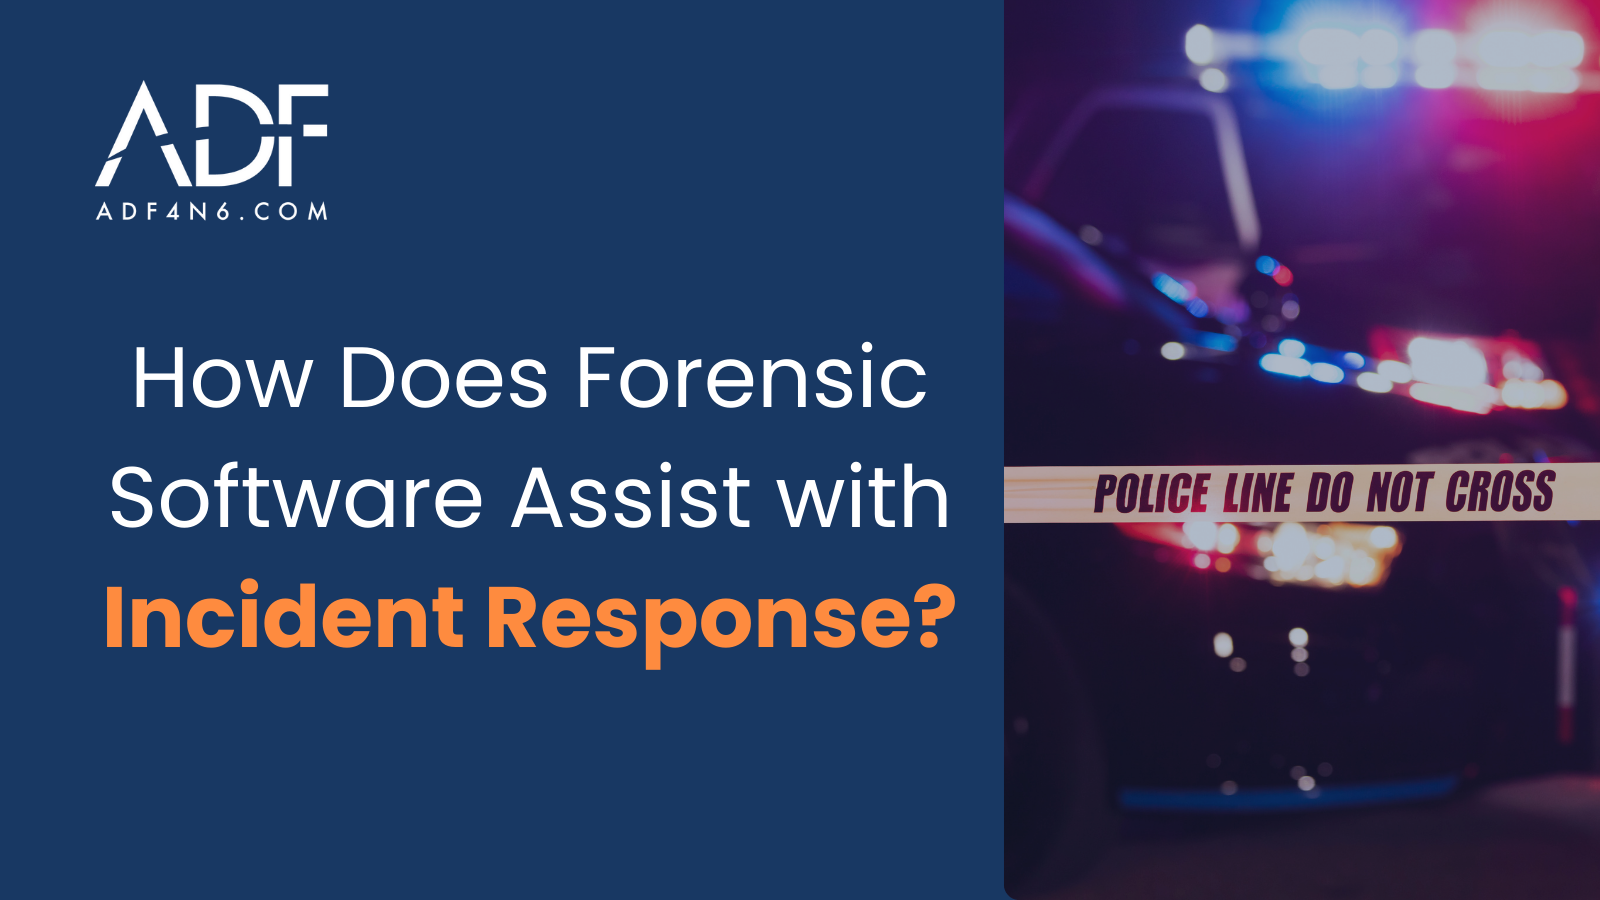 How Does Forensic Software Assist with Incident Response?